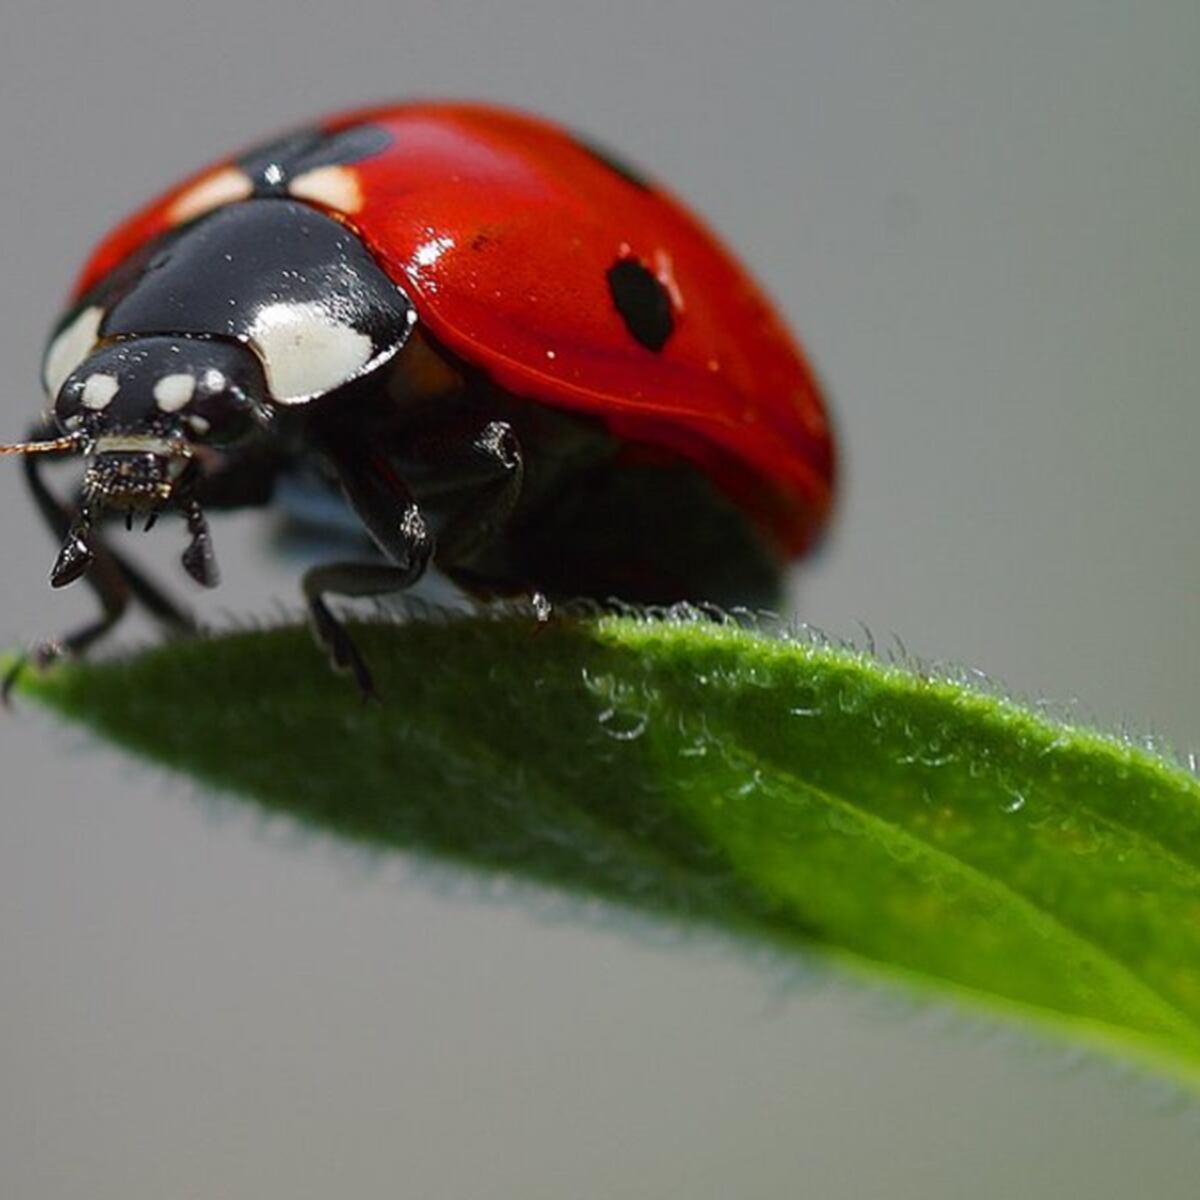 Lady beetle invasion - Insects in the City